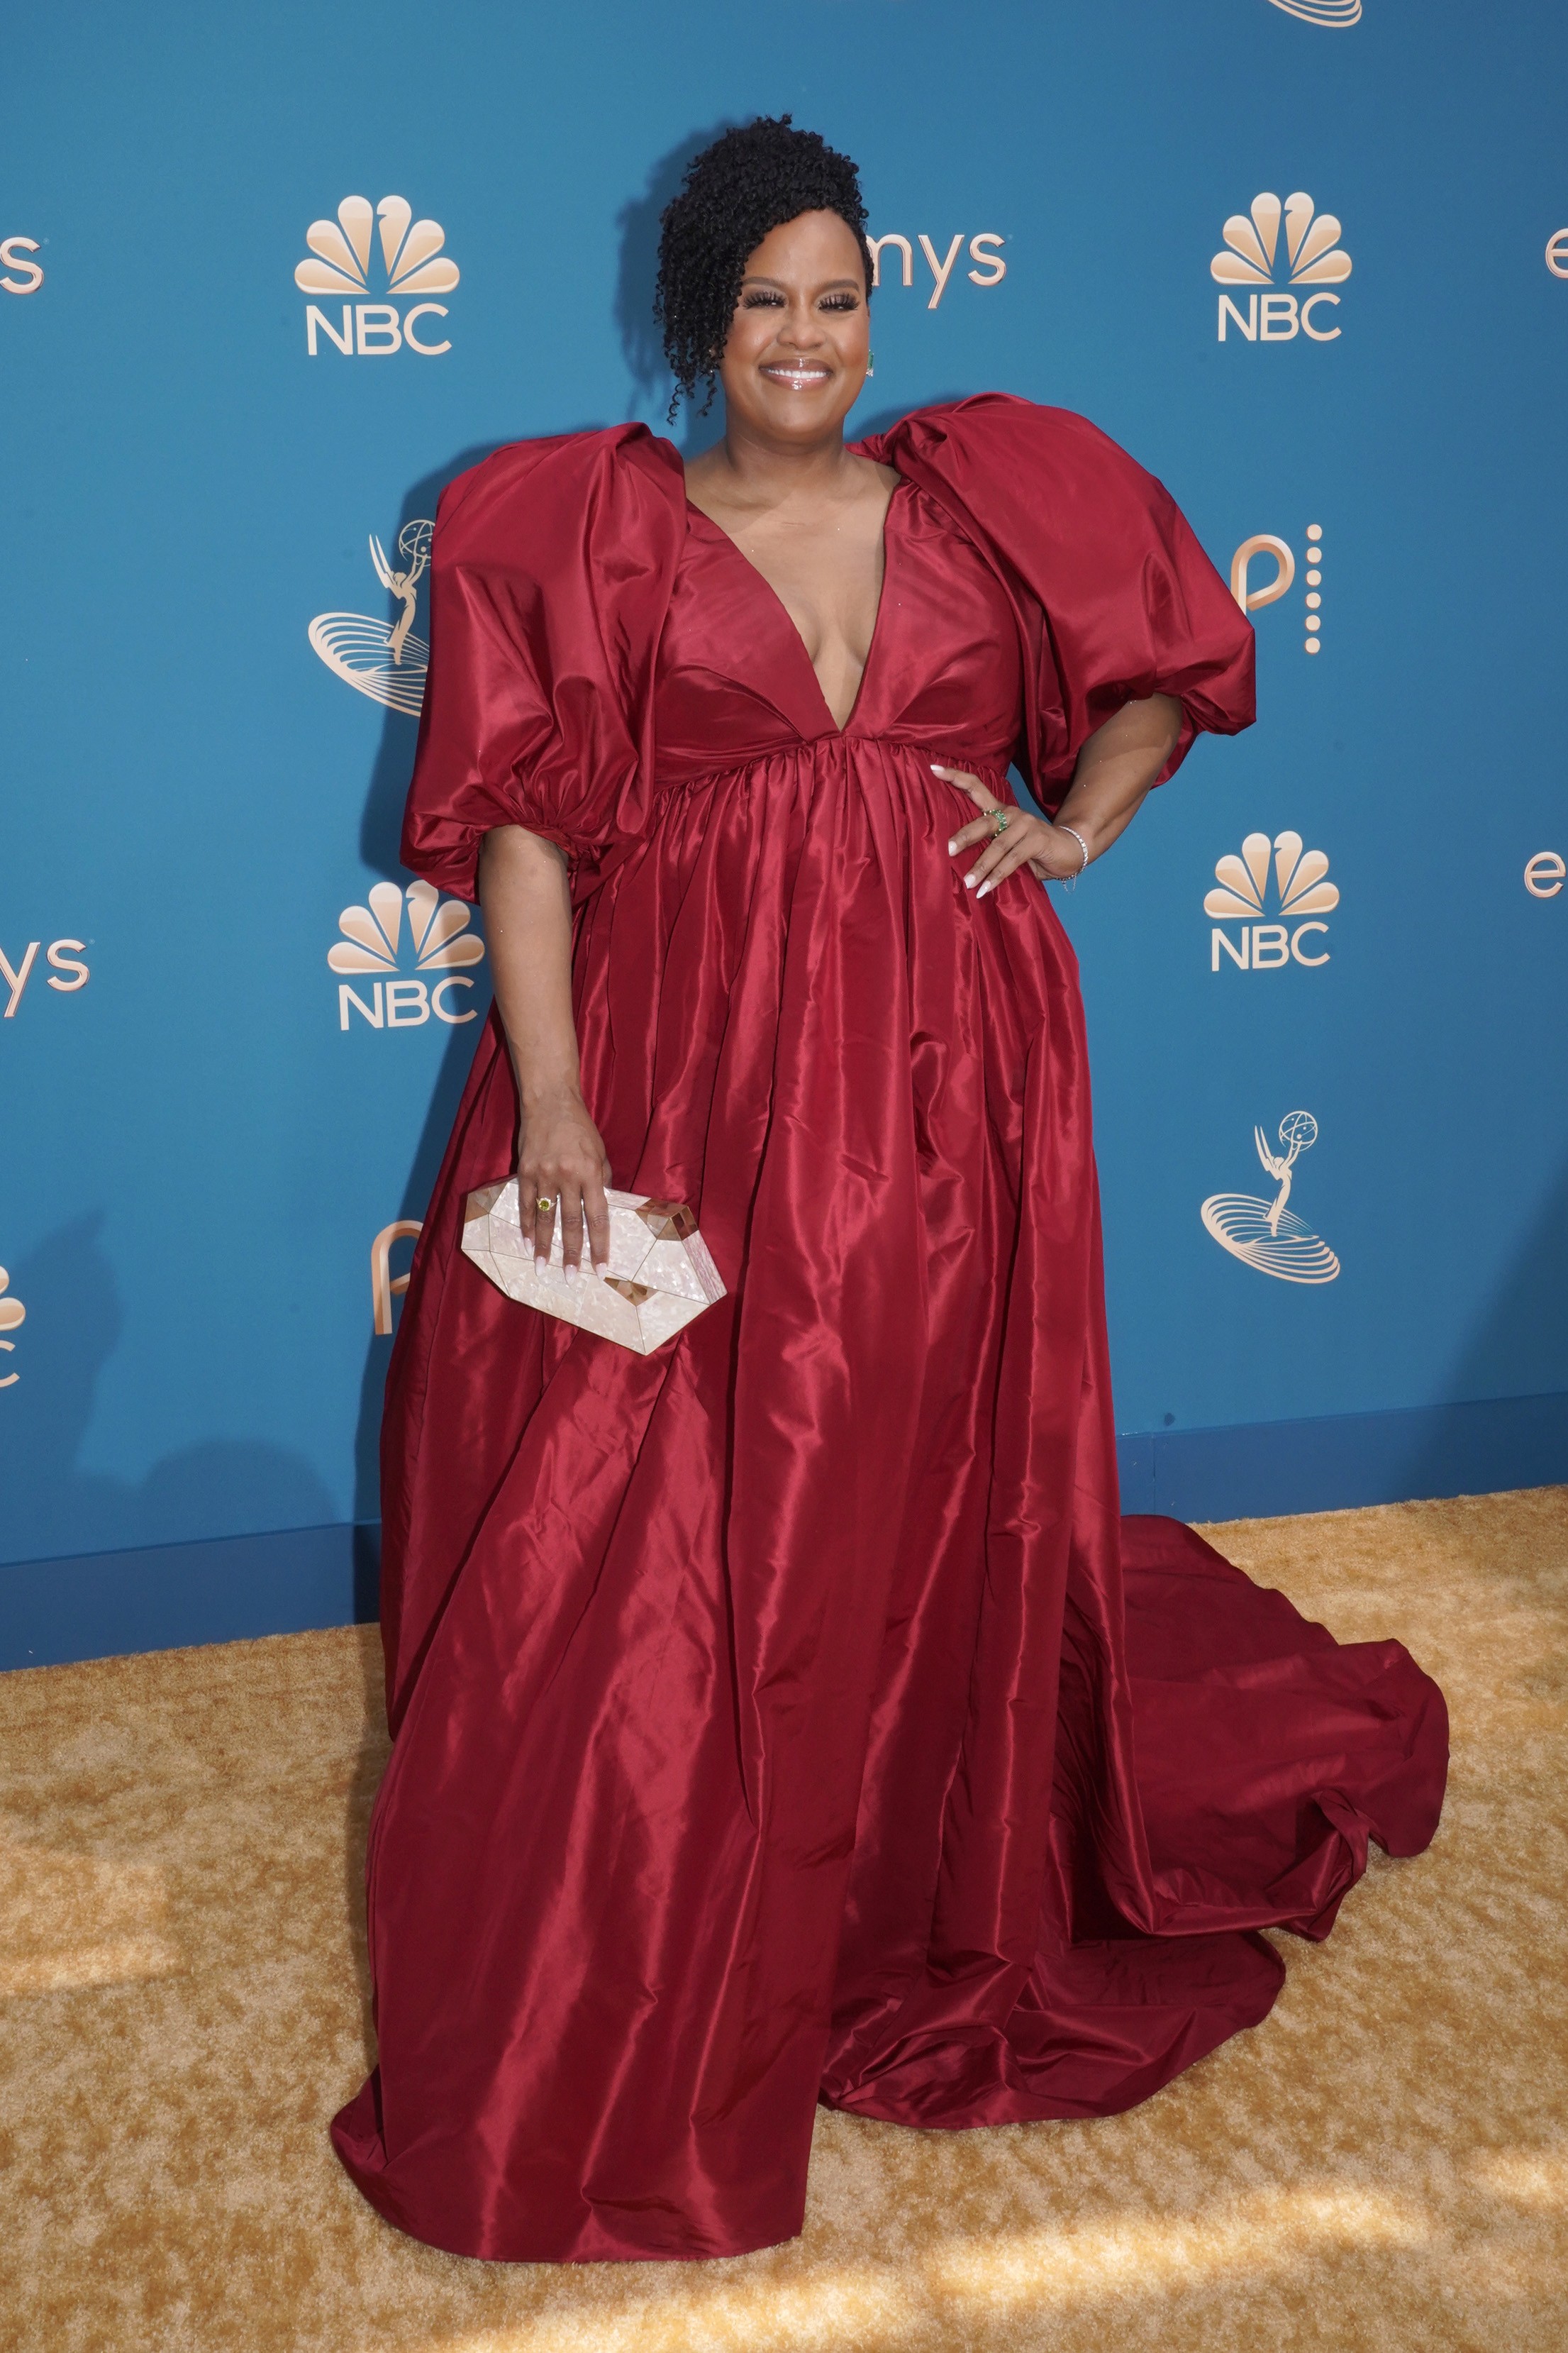 LOS ANGELES, CALIFORNIA - SEPTEMBER 12: 74th ANNUAL PRIMETIME EMMY AWARDS -- Pictured: Natasha Rothwell arrives to the 74th Annual Primetime Emmy Awards held at the Microsoft Theater on September 12, 2022. -- (Photo by Evans Vestal Ward/NBC via Getty Imag (Foto: NBC via Getty Images)